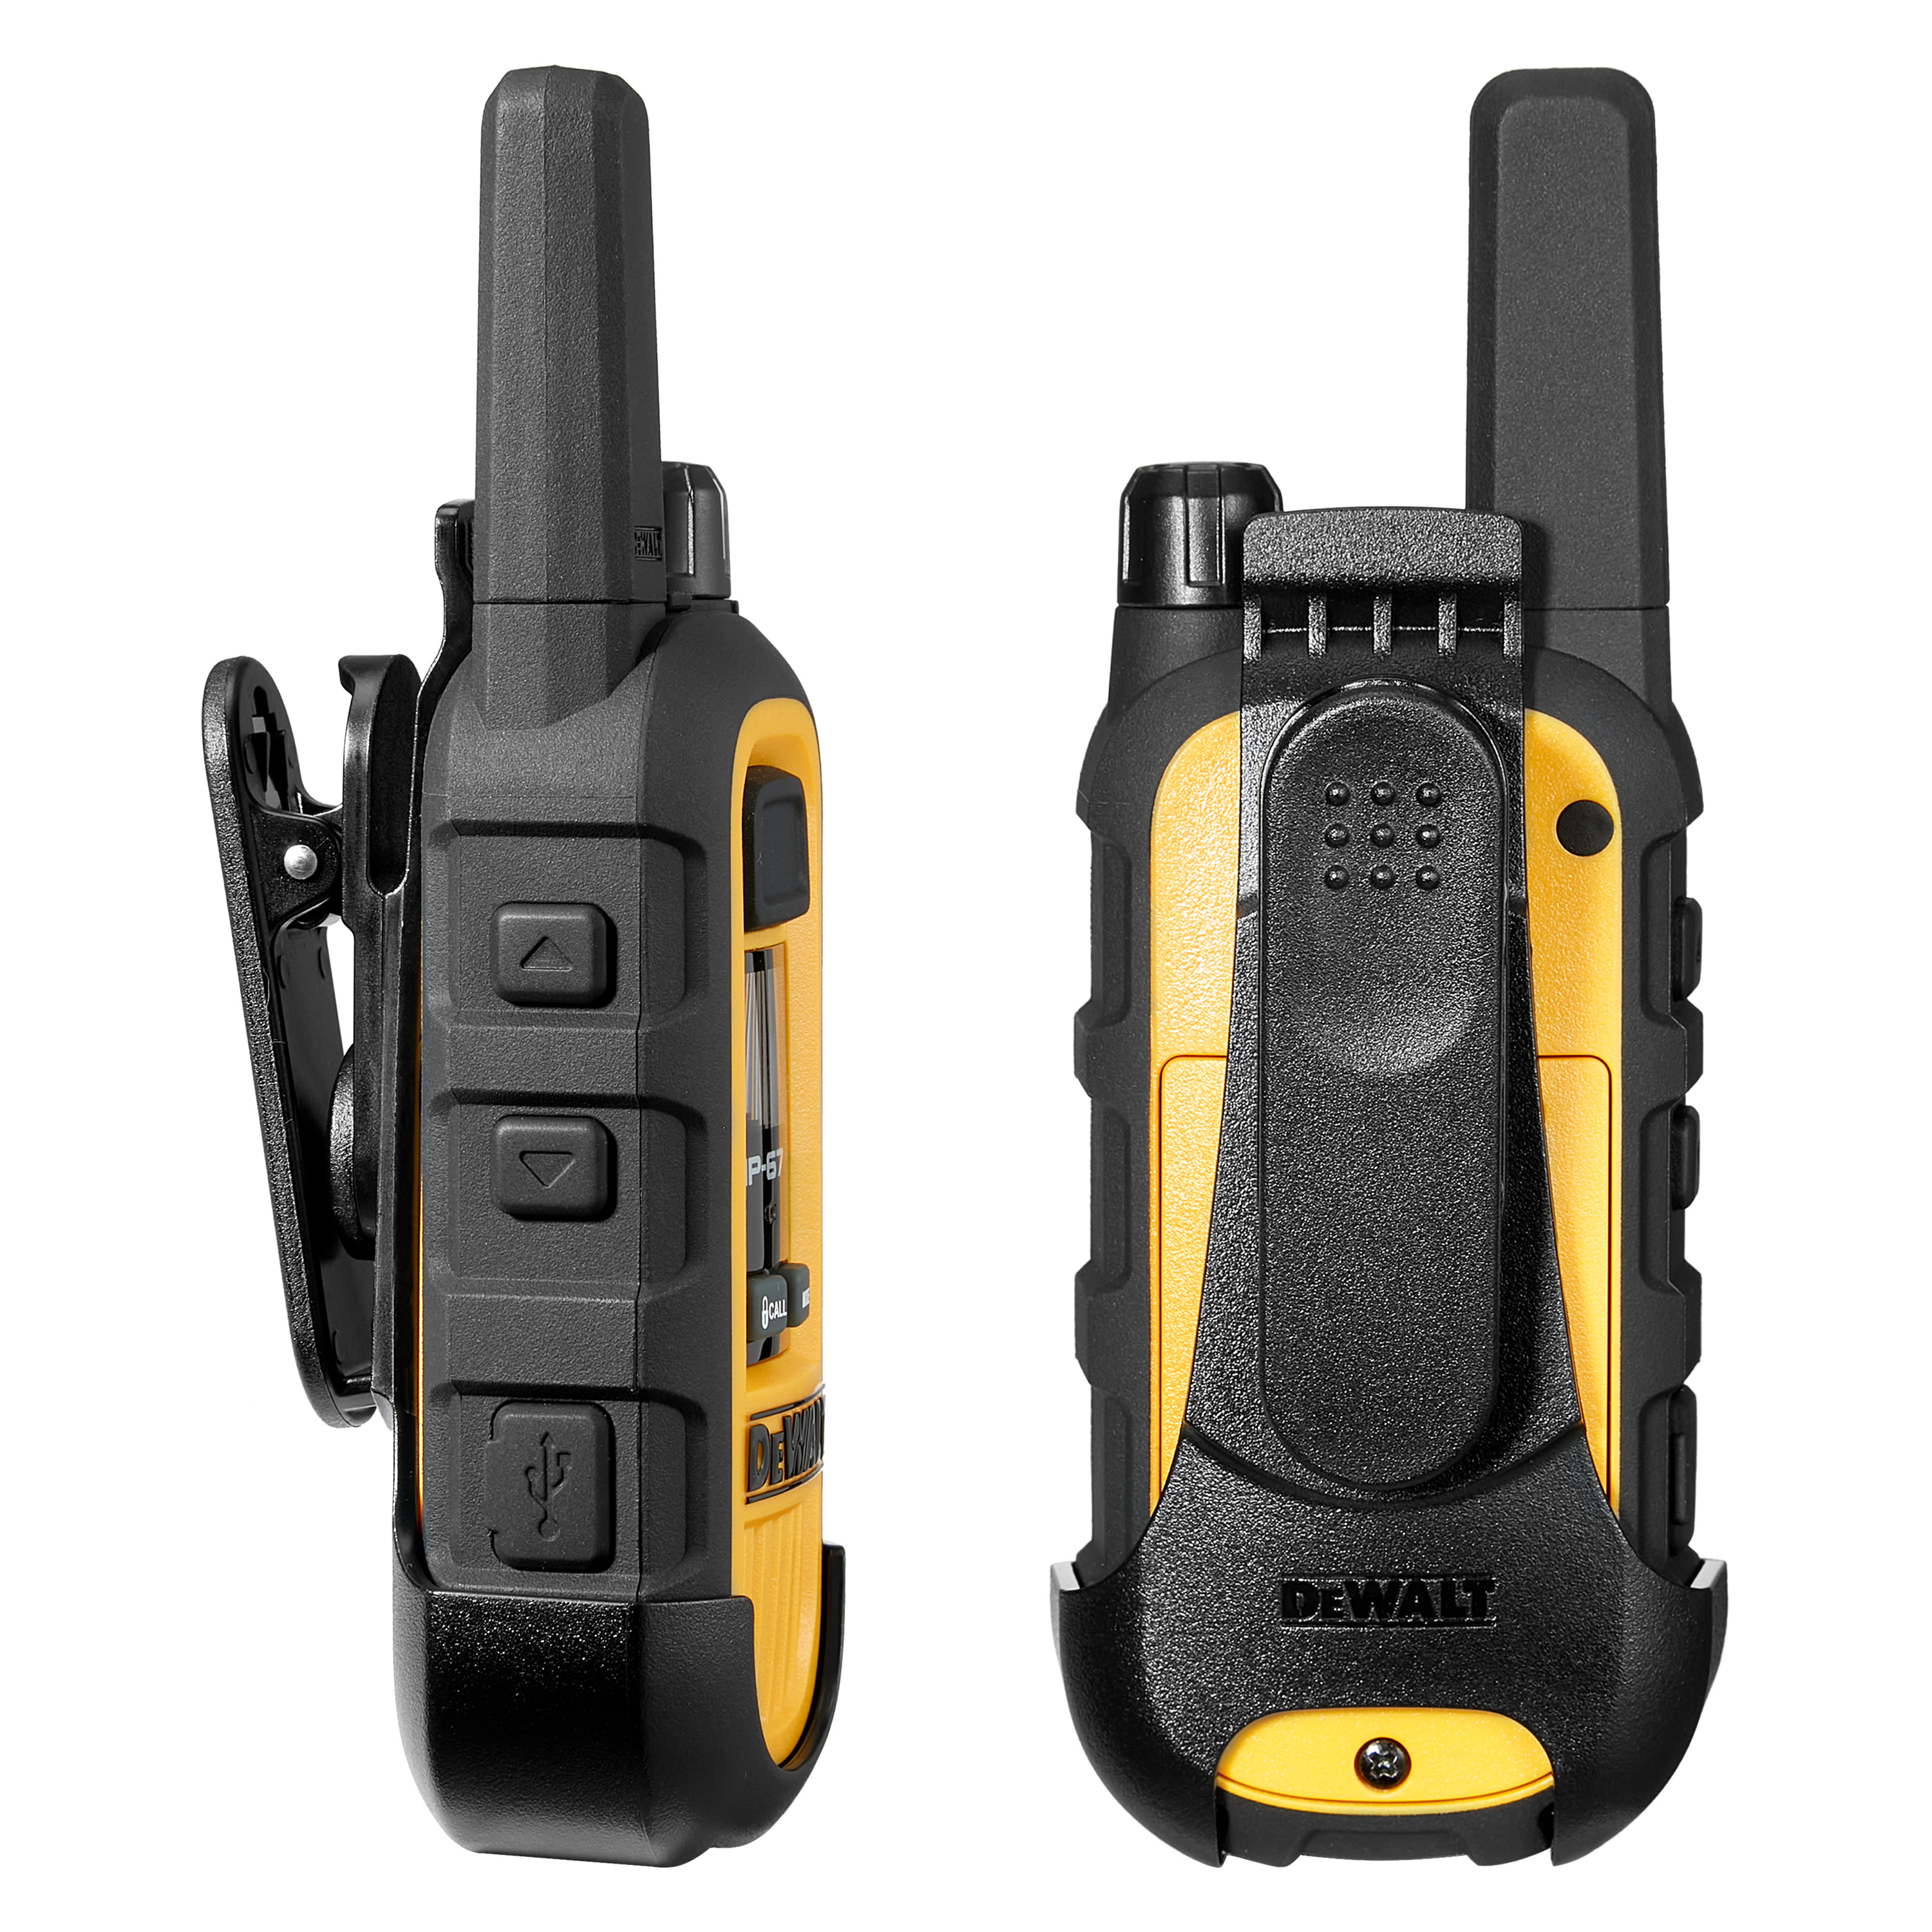 DeWalt DXFRS300 Rechargeable Two-Way Radio Pack